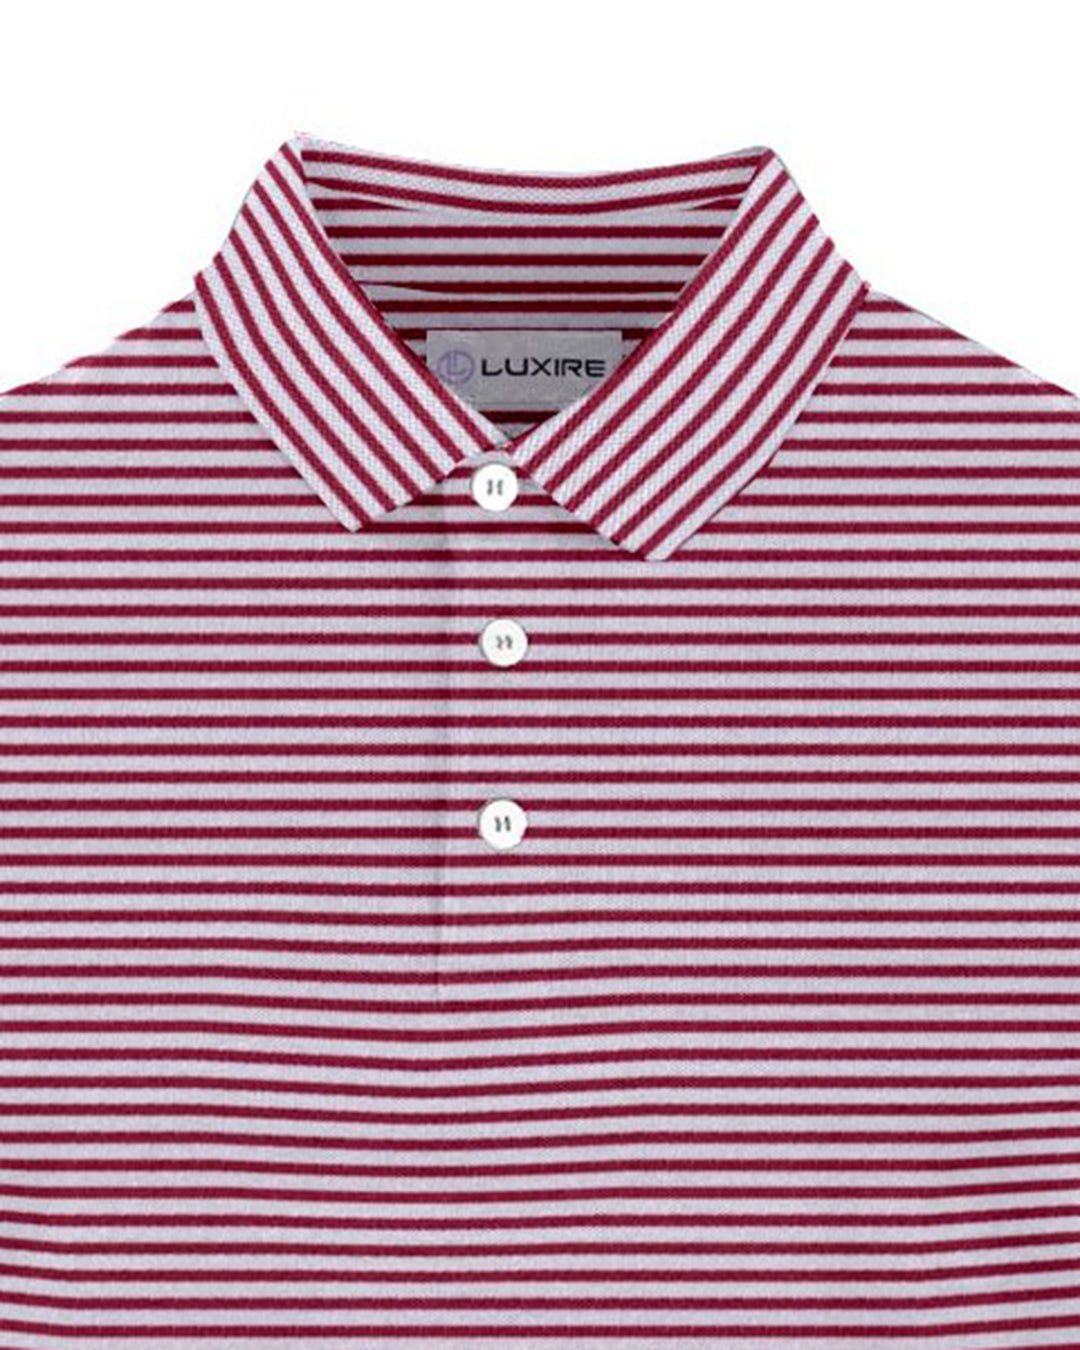 Collar of the custom oxford polo shirt for men by Luxire in white with red candy stripes